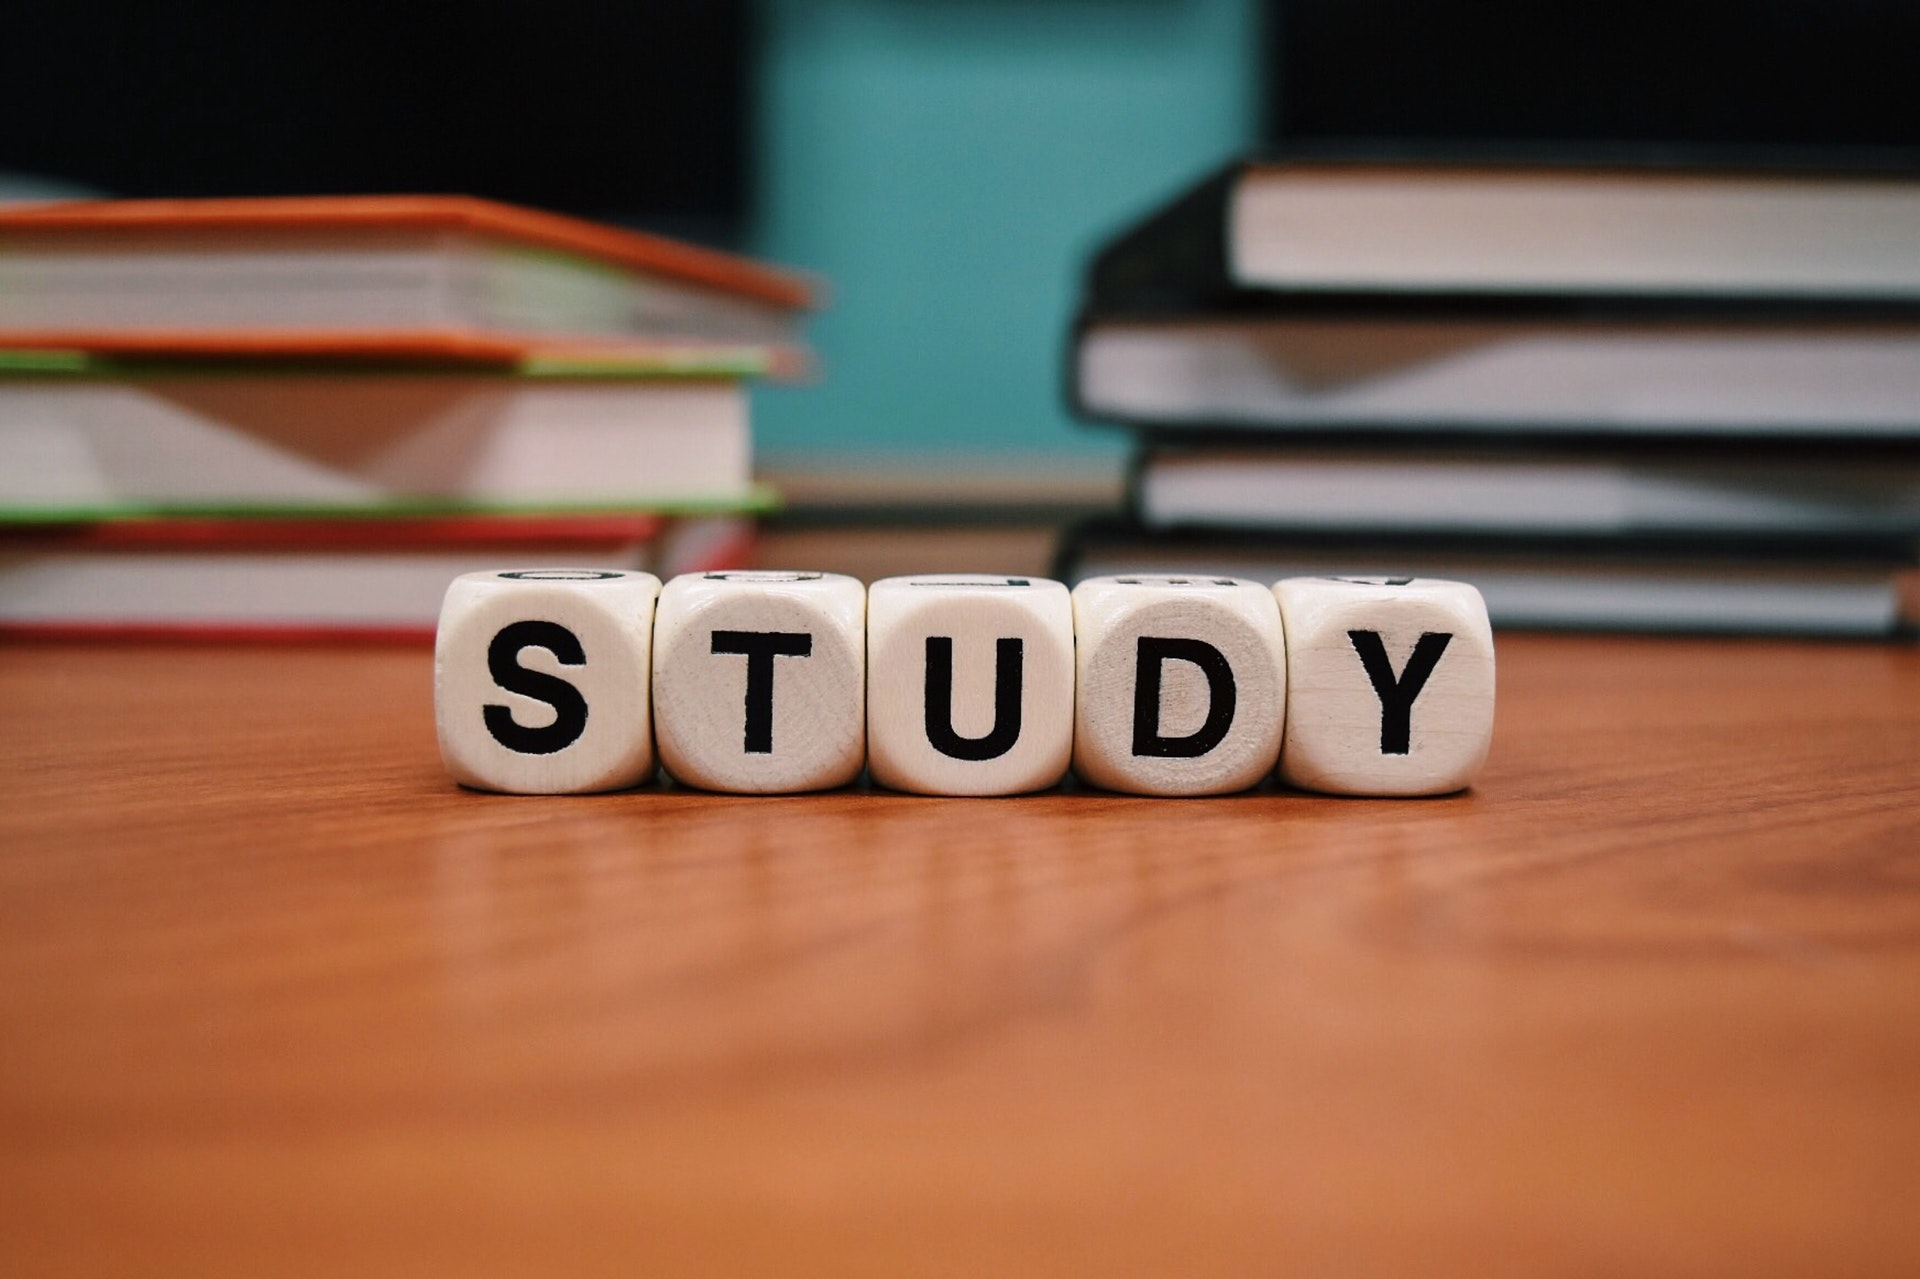 Tips to studying effectively